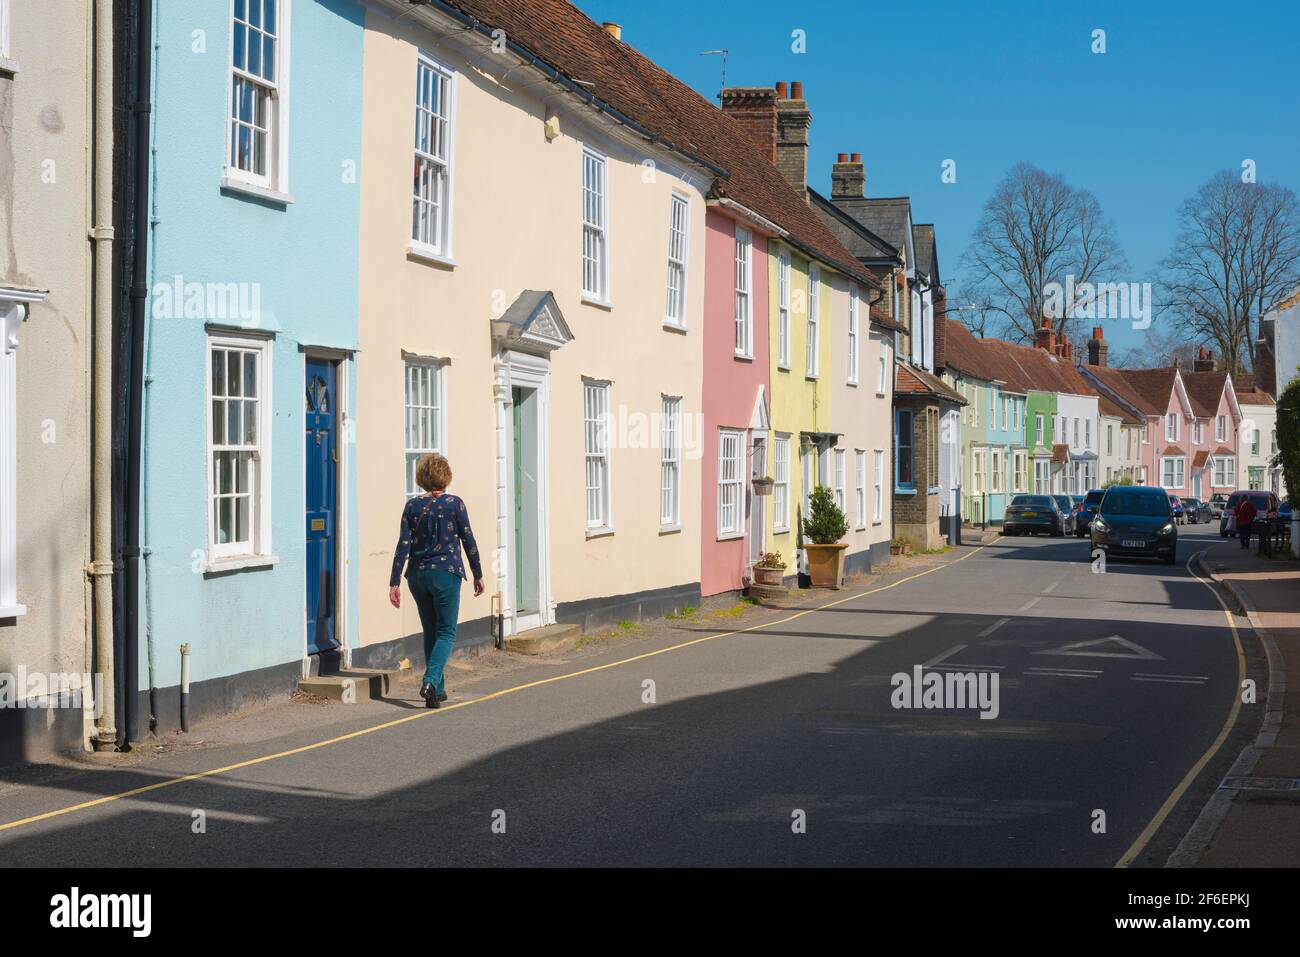 Traditional street UK, rear view of a woman walking along a typically colourful village street containing period properties, Coggeshall, Essex. Stock Photo